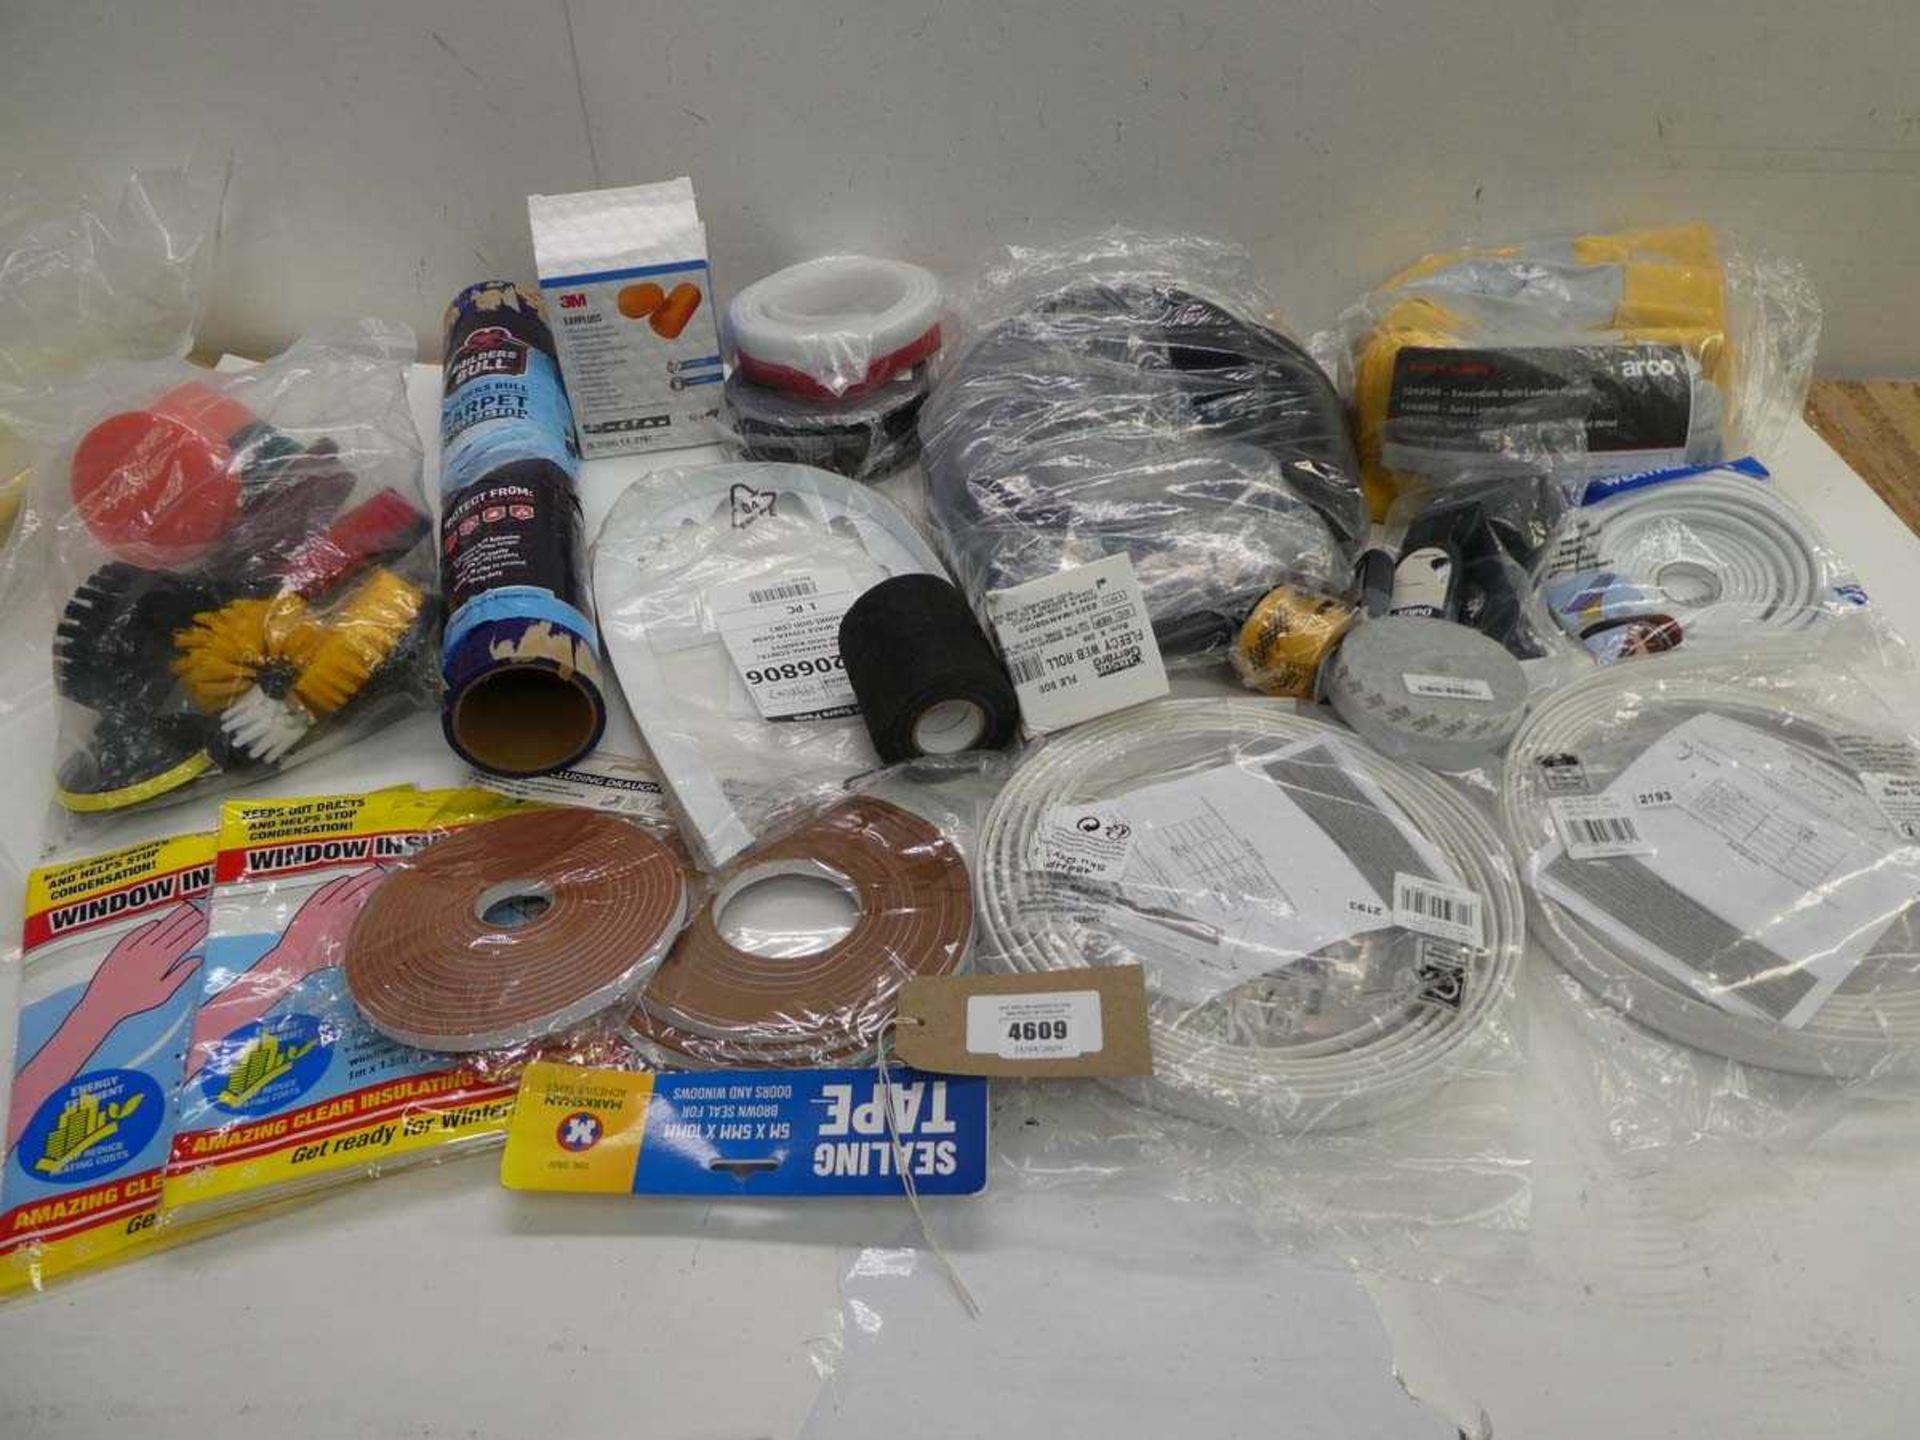 +VAT Work gloves, carpet protector, ear buds, window insulation kits, curtain rails, adhesive tapes,